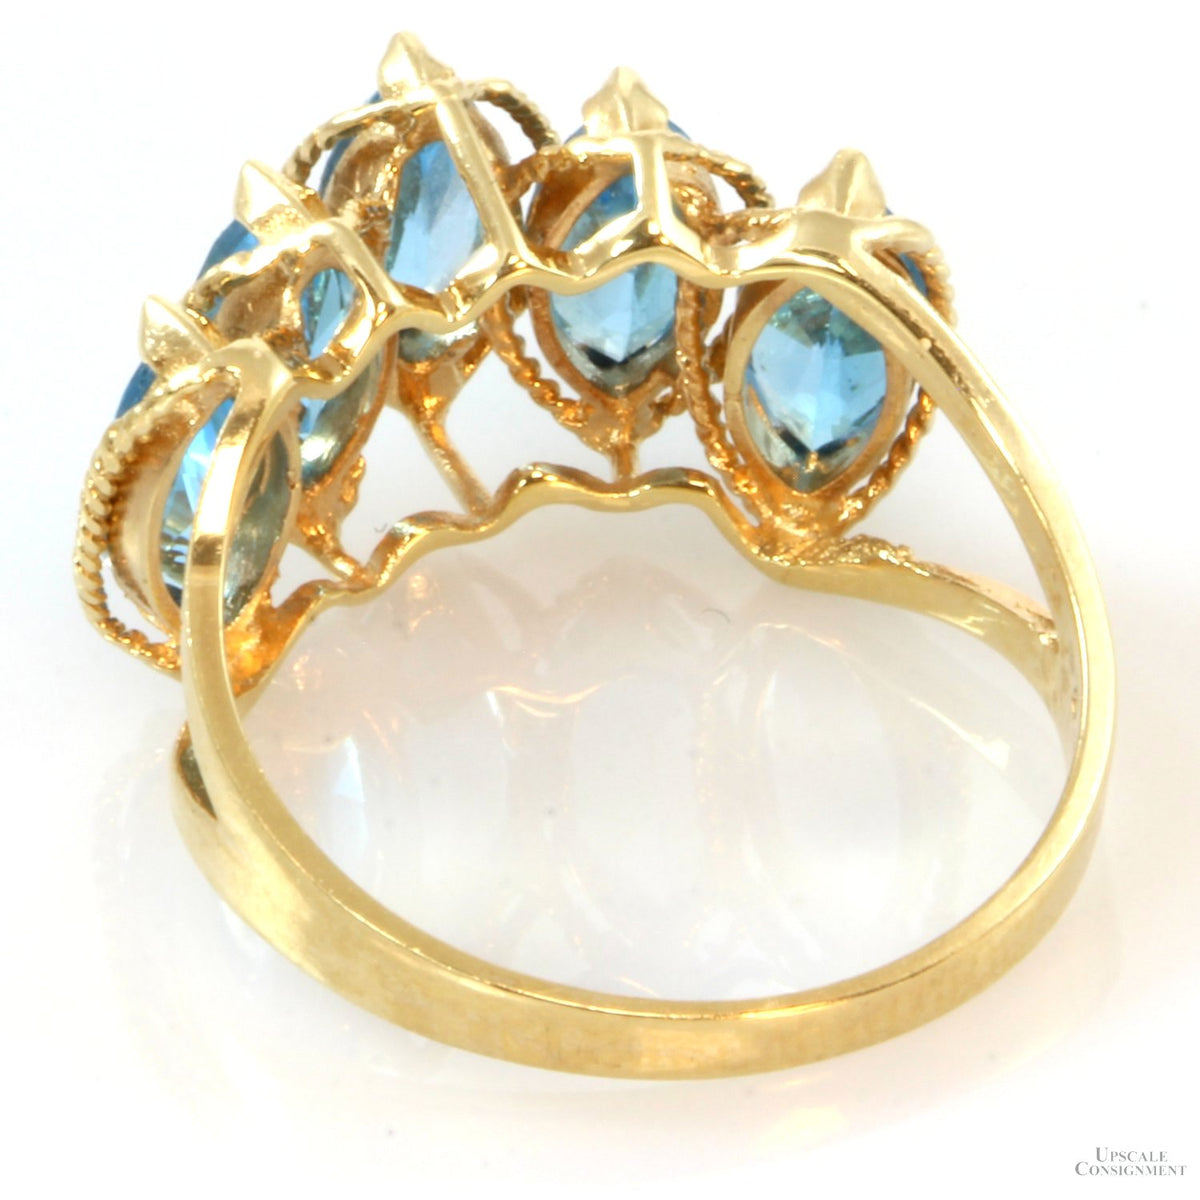 14K Gold 5-Marquise Shape 2.80ctw Blue Topaz Ring